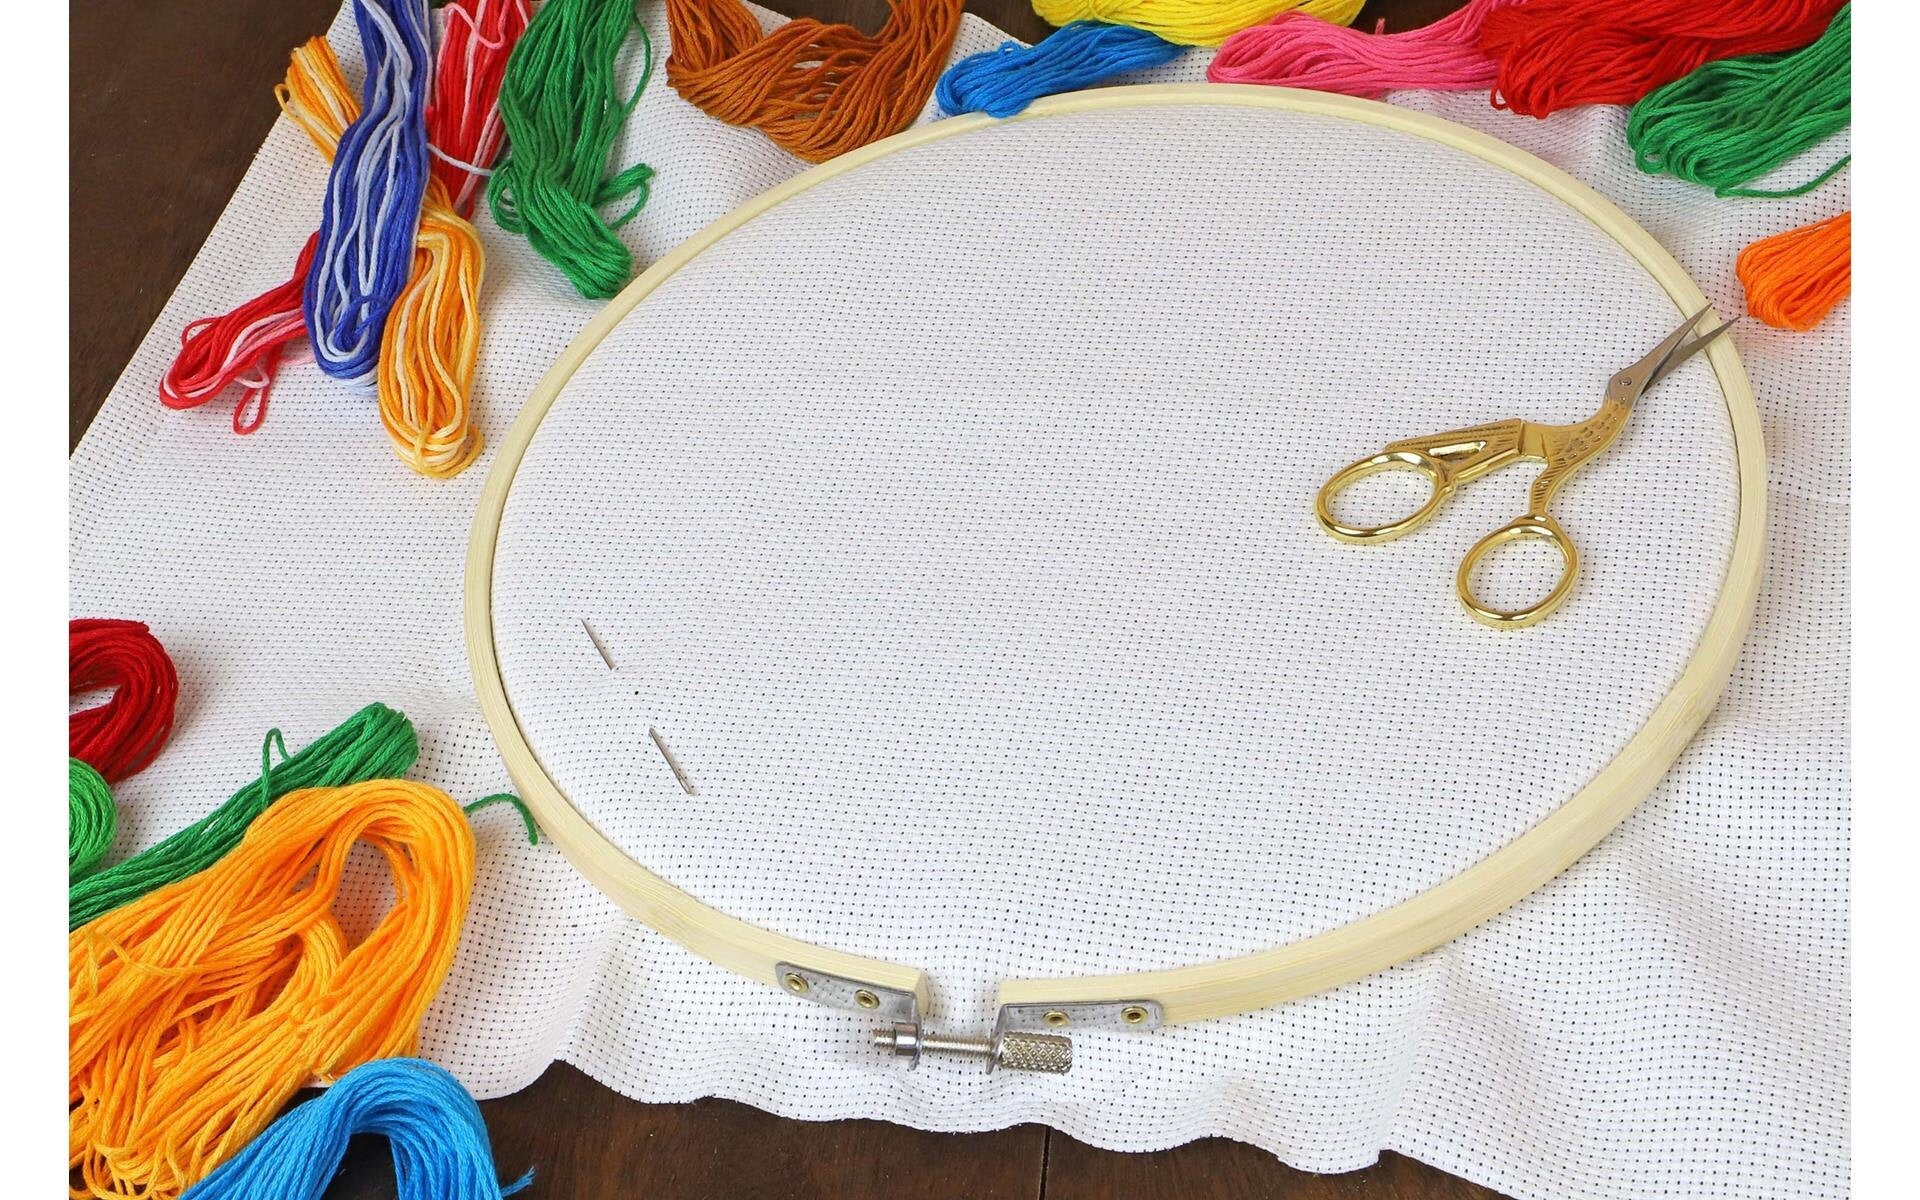 Essentials by Leisure Arts Wood Embroidery Hoop 8 Bamboo - wooden hoops  for crafts - embroidery hoop holder - cross stitch hoop - cross stitch hoops  and frames